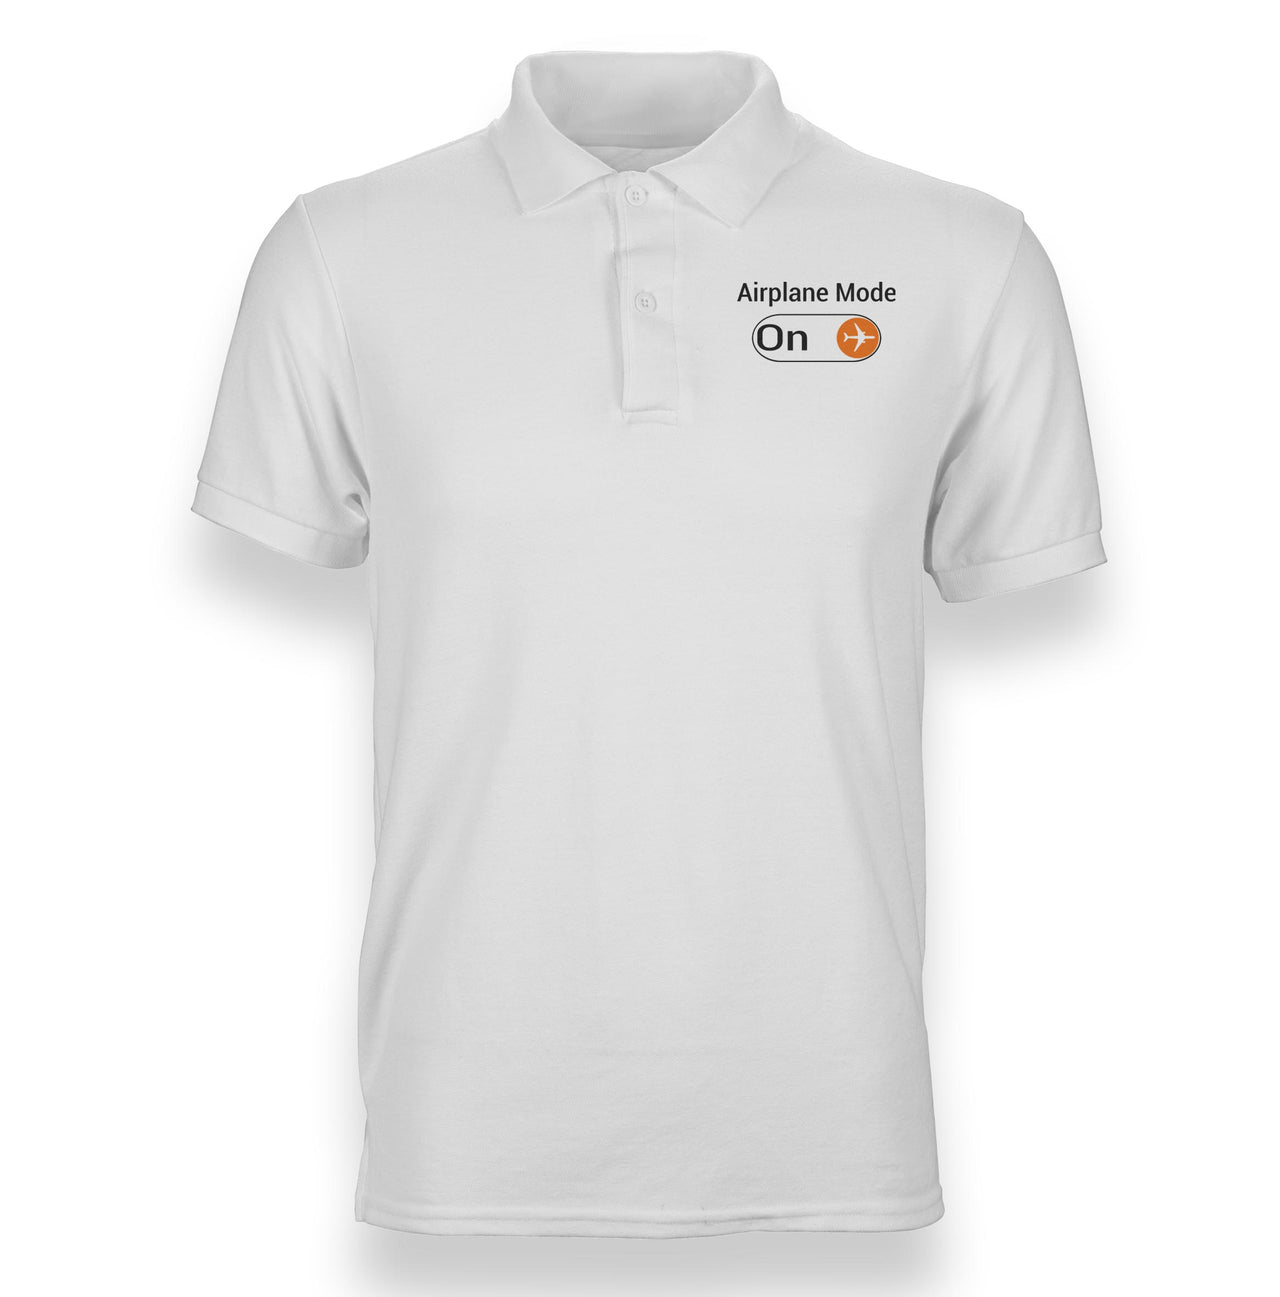 Airplane Mode On Designed Polo T-Shirts